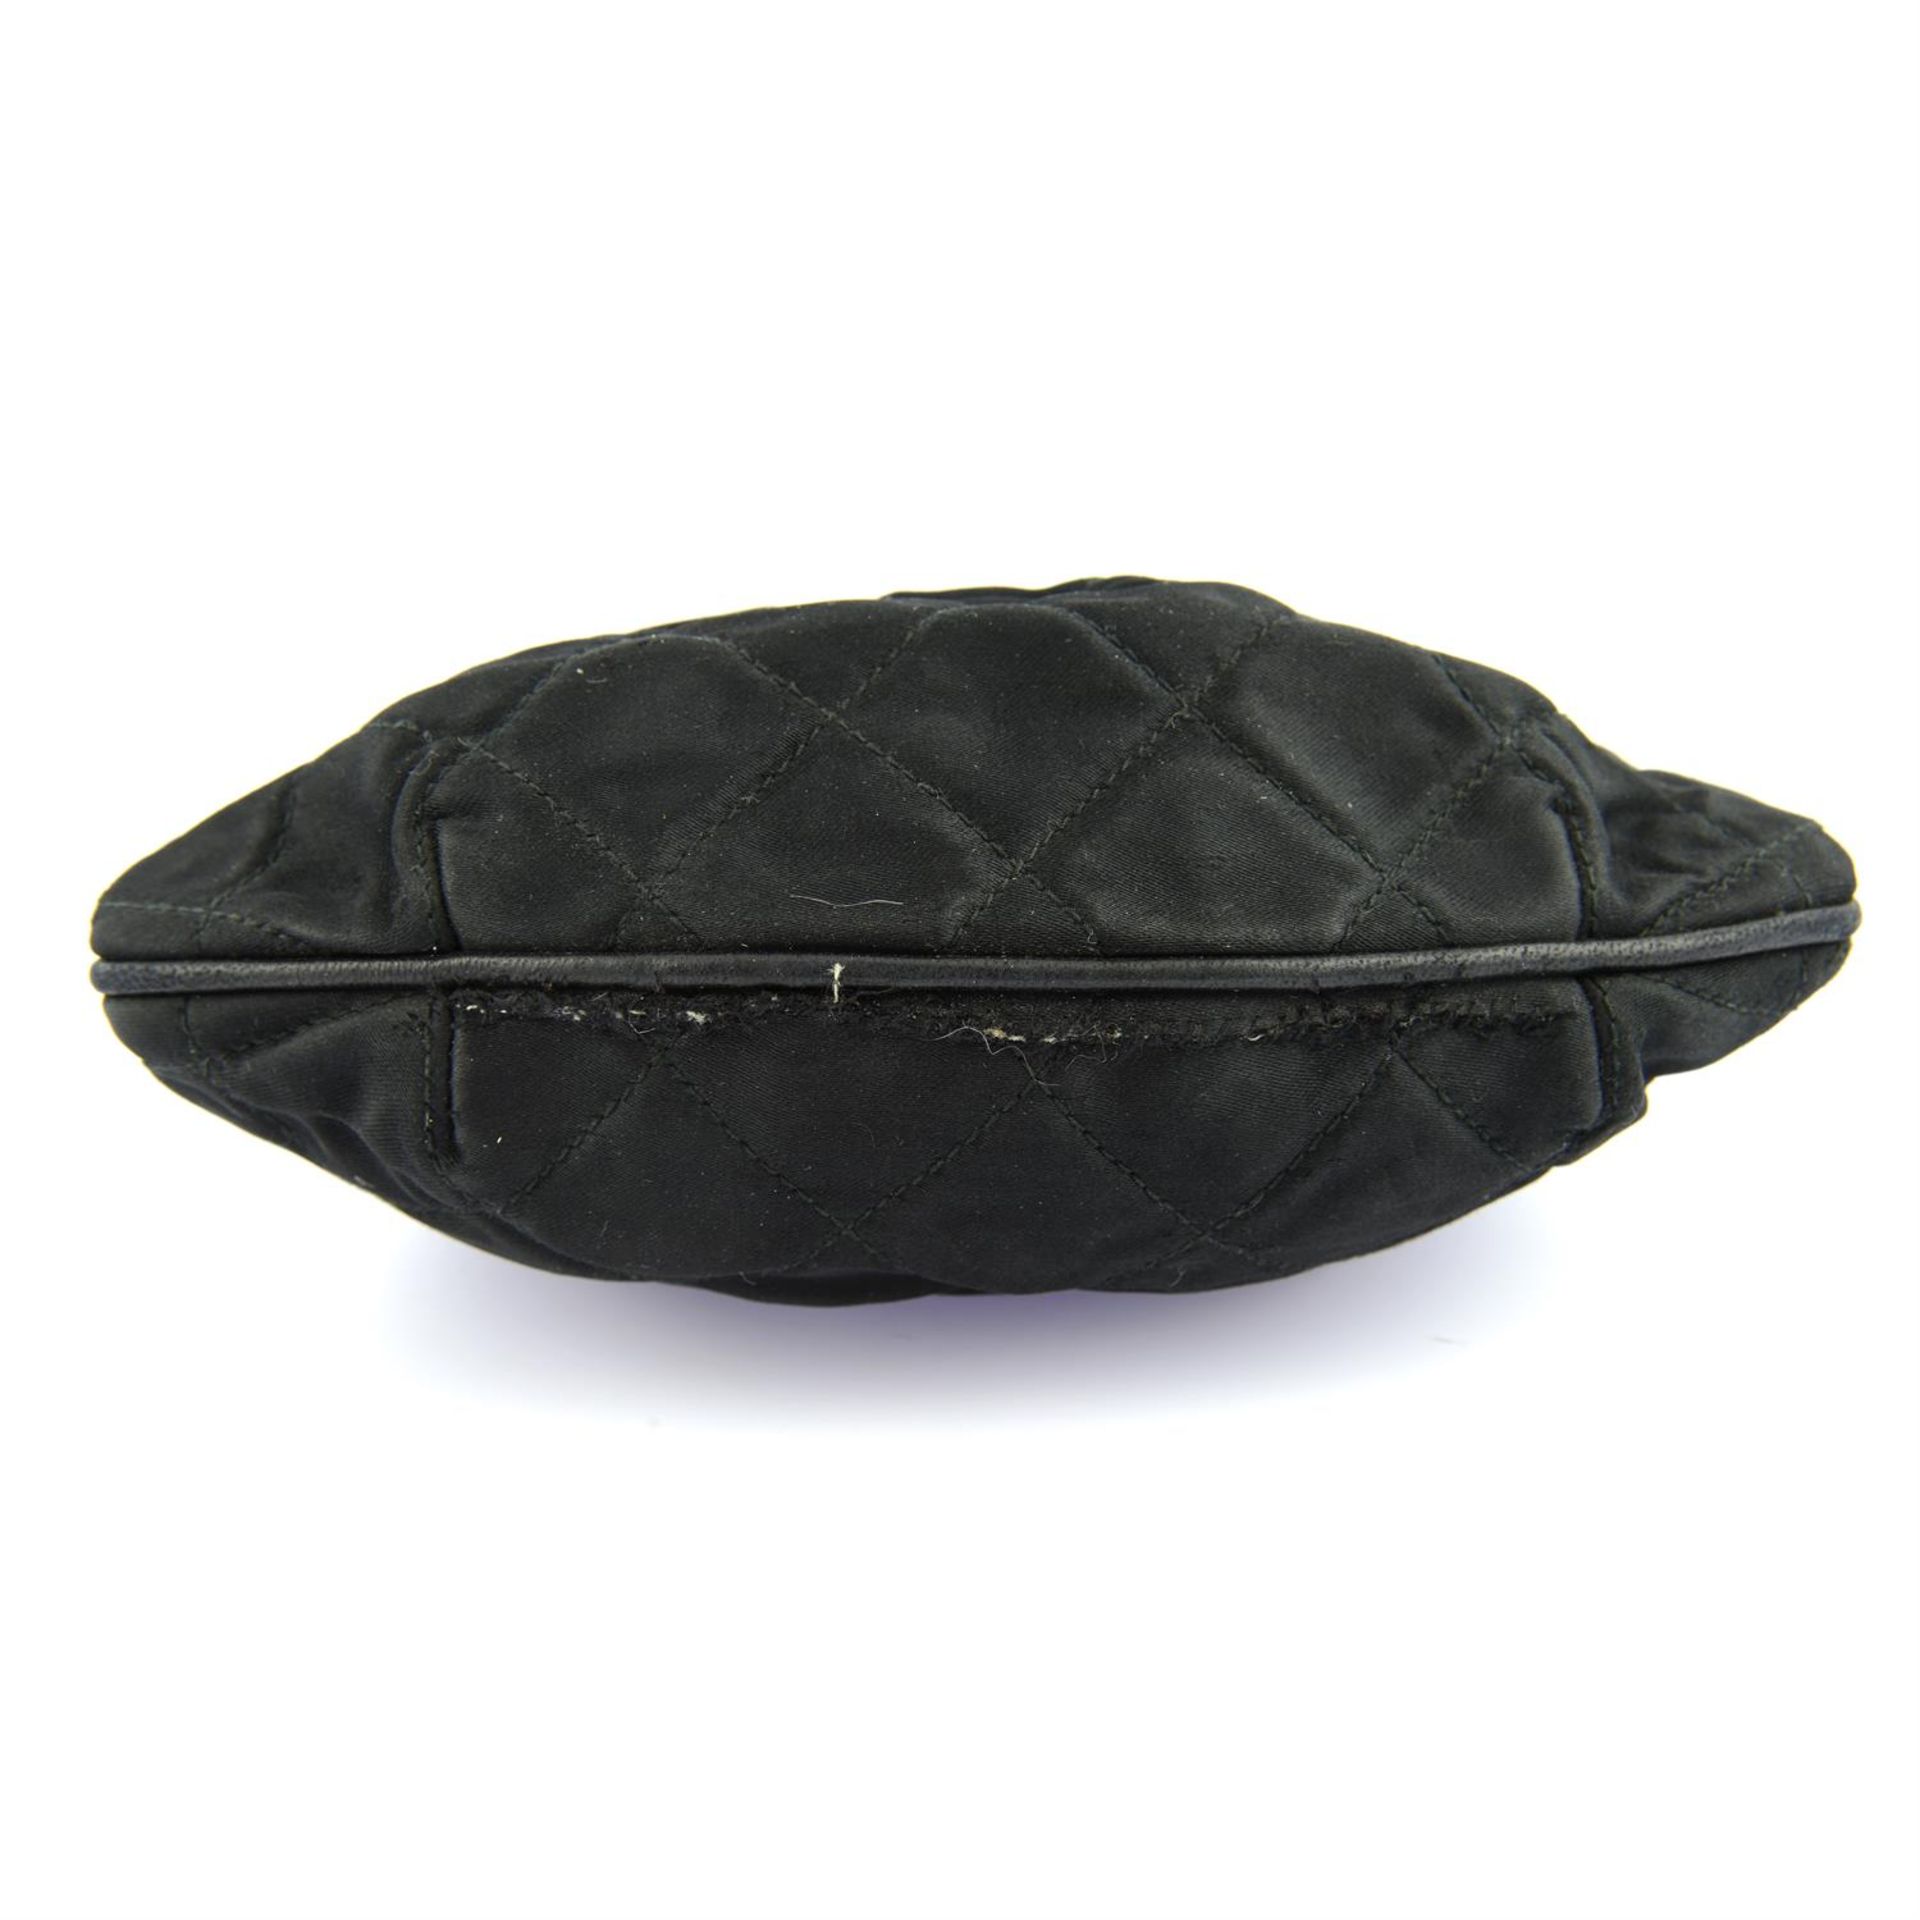 CHANEL - a 1989 black fabric small clutch bag. - Image 5 of 6